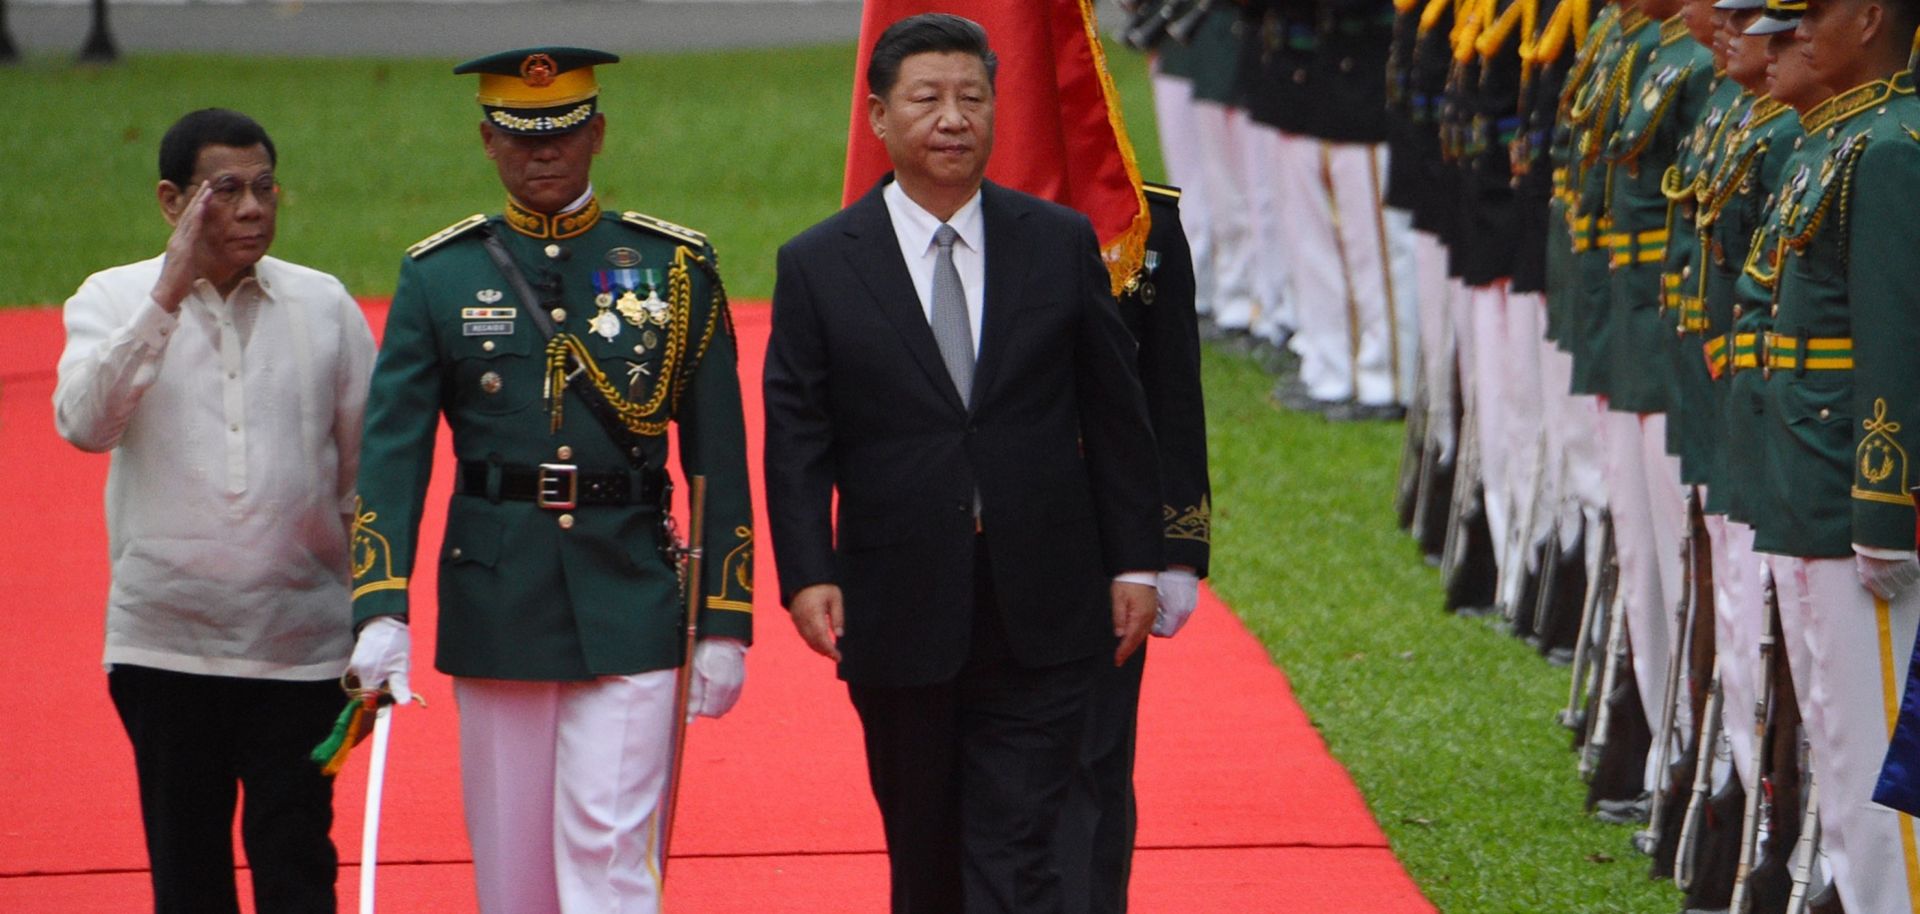 Chinese President Xi Jinping, right, and Philippine President Rodrigo Duterte, left, inspect the troops during a welcoming ceremony at the Malacanang Palace in Manila on Nov. 20, 2018.